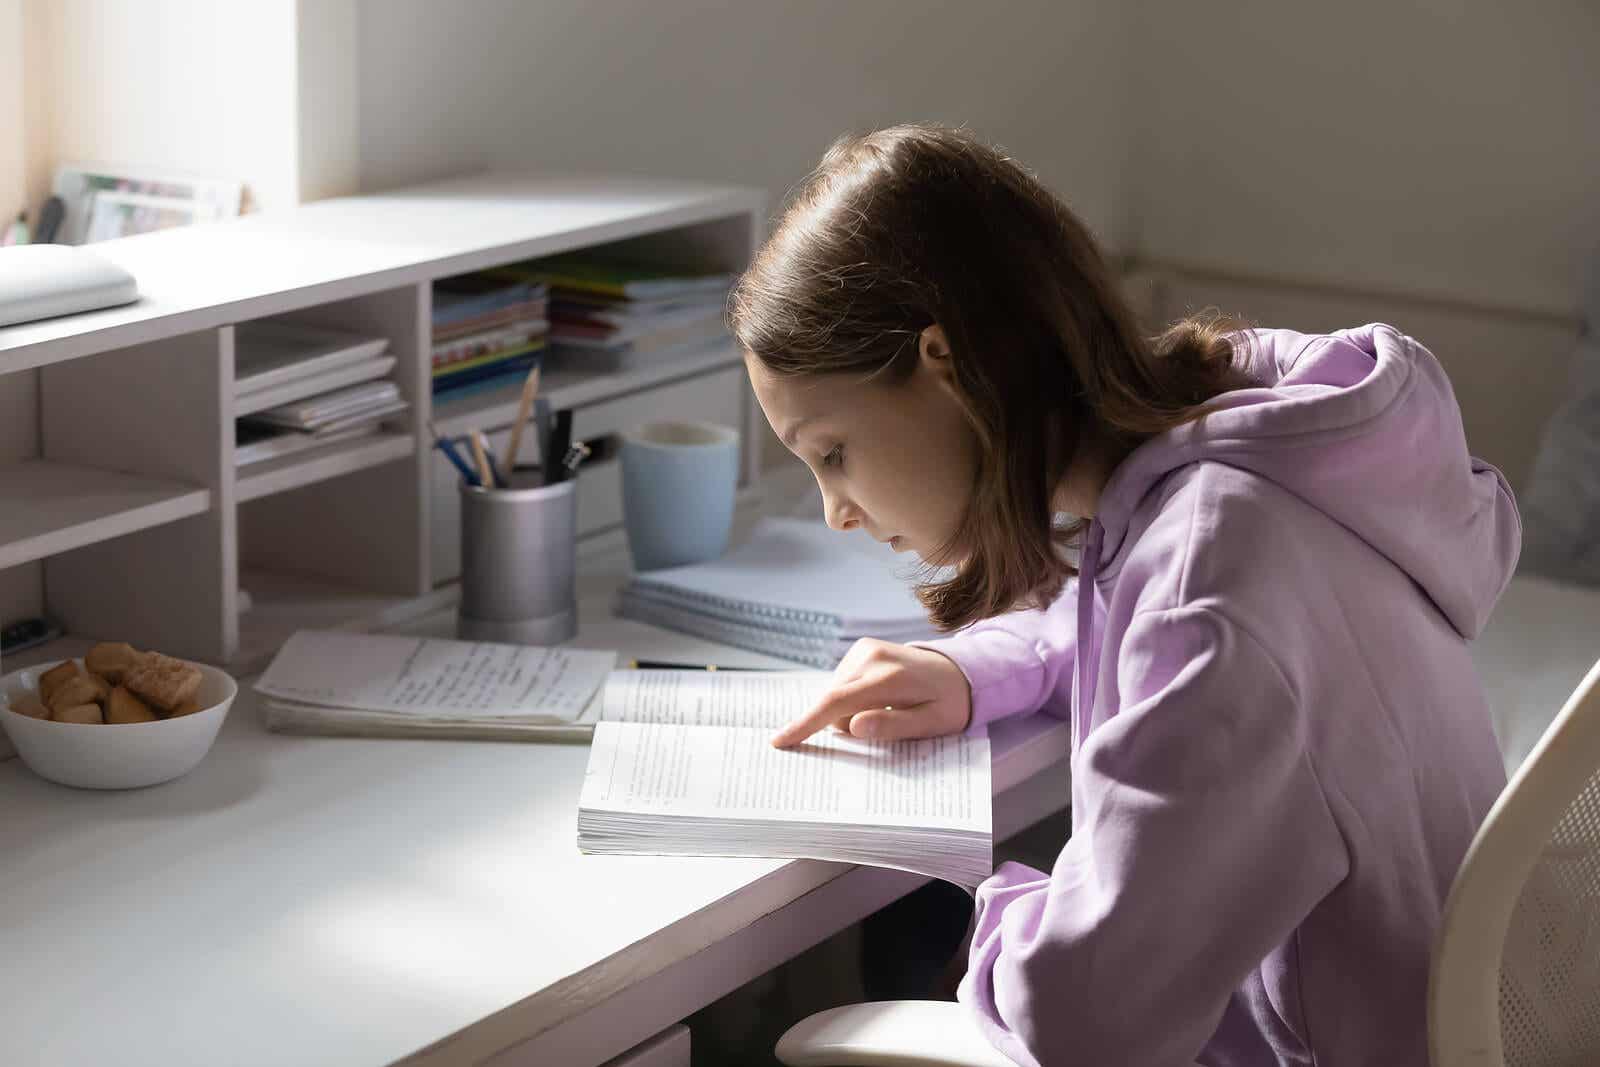 An adolescent girl studying at her desk in her room.